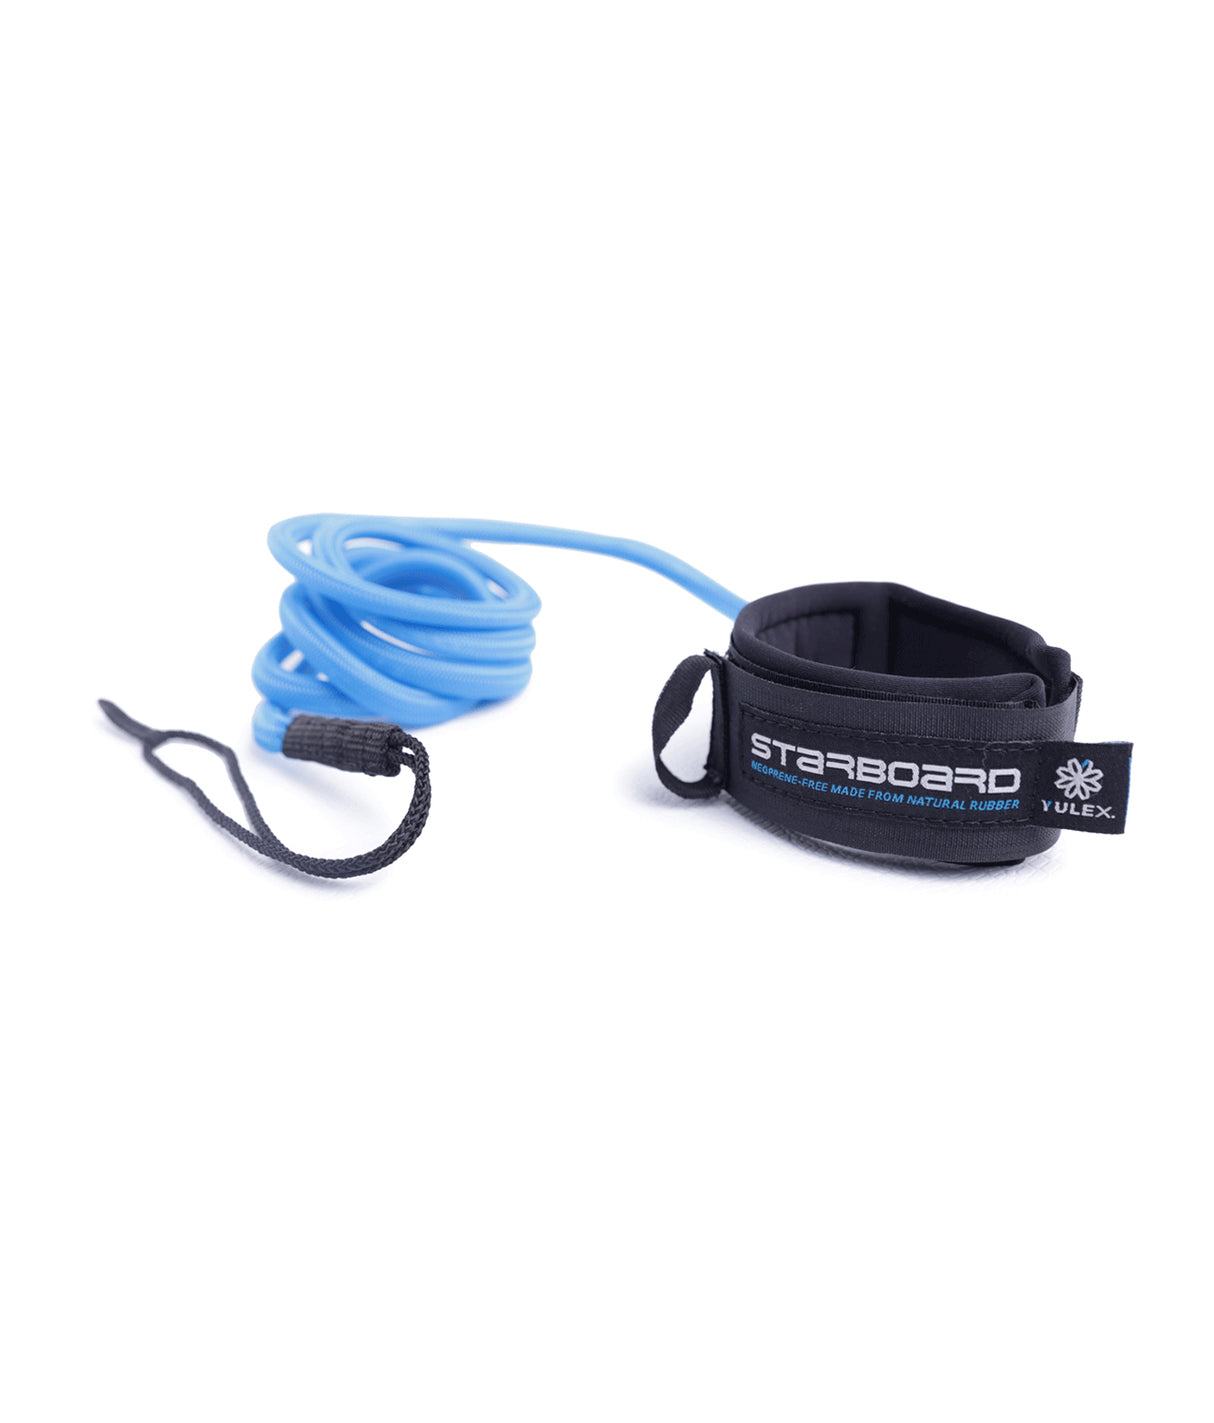 starboard 14'0" inflatable touring m deluxe sc sup leash